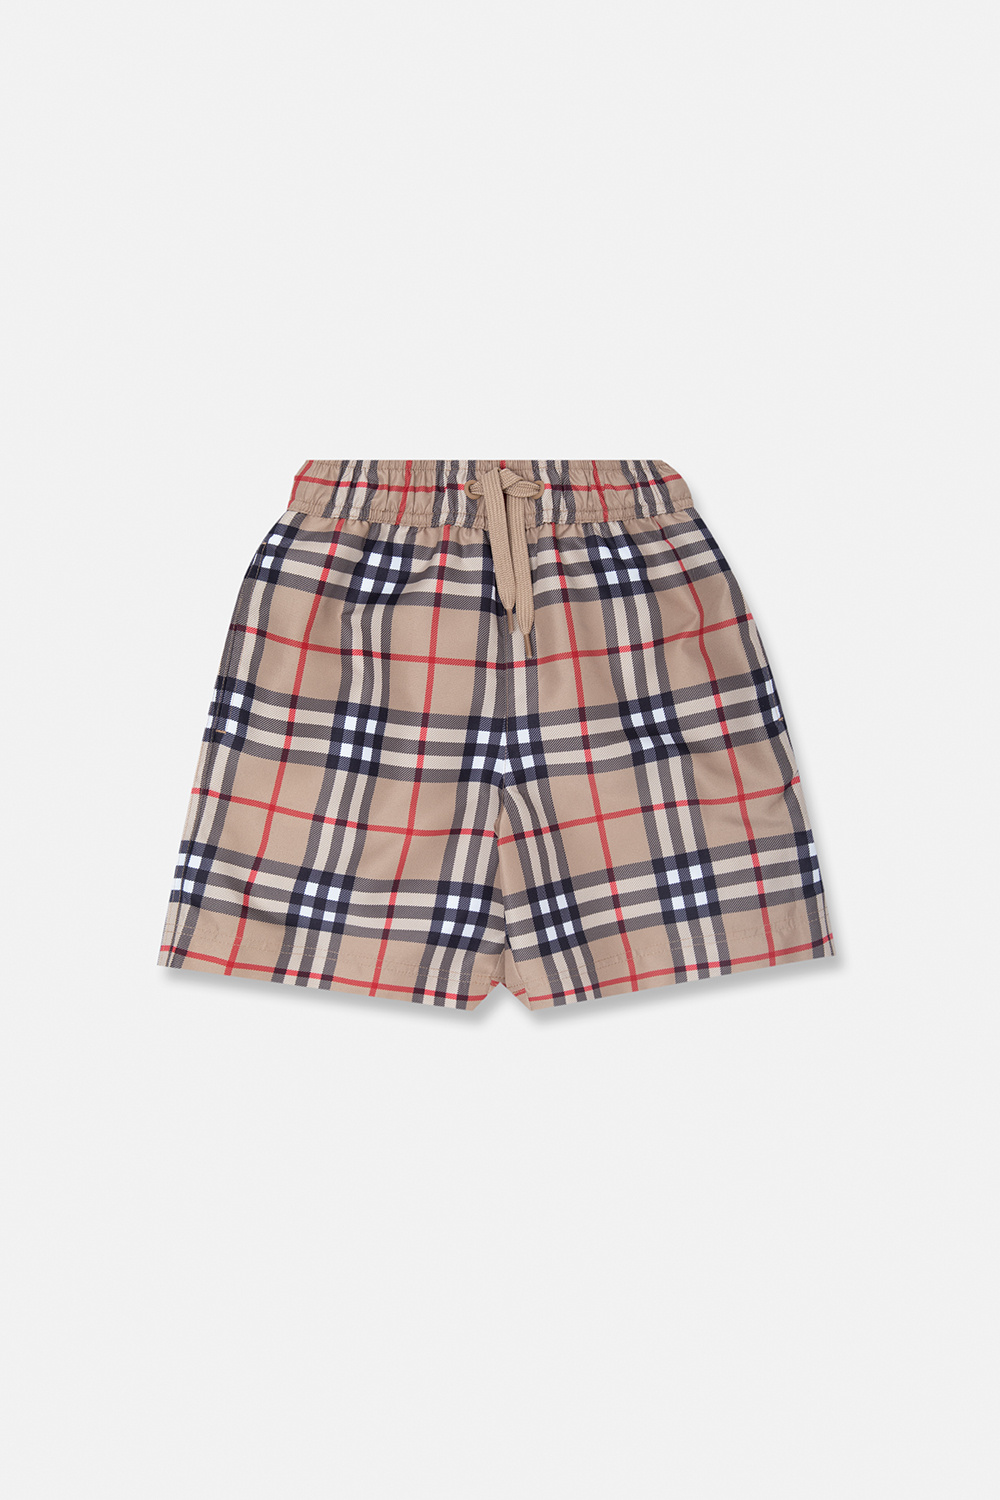 Burberry Kids ‘Malcolm’ checked shorts